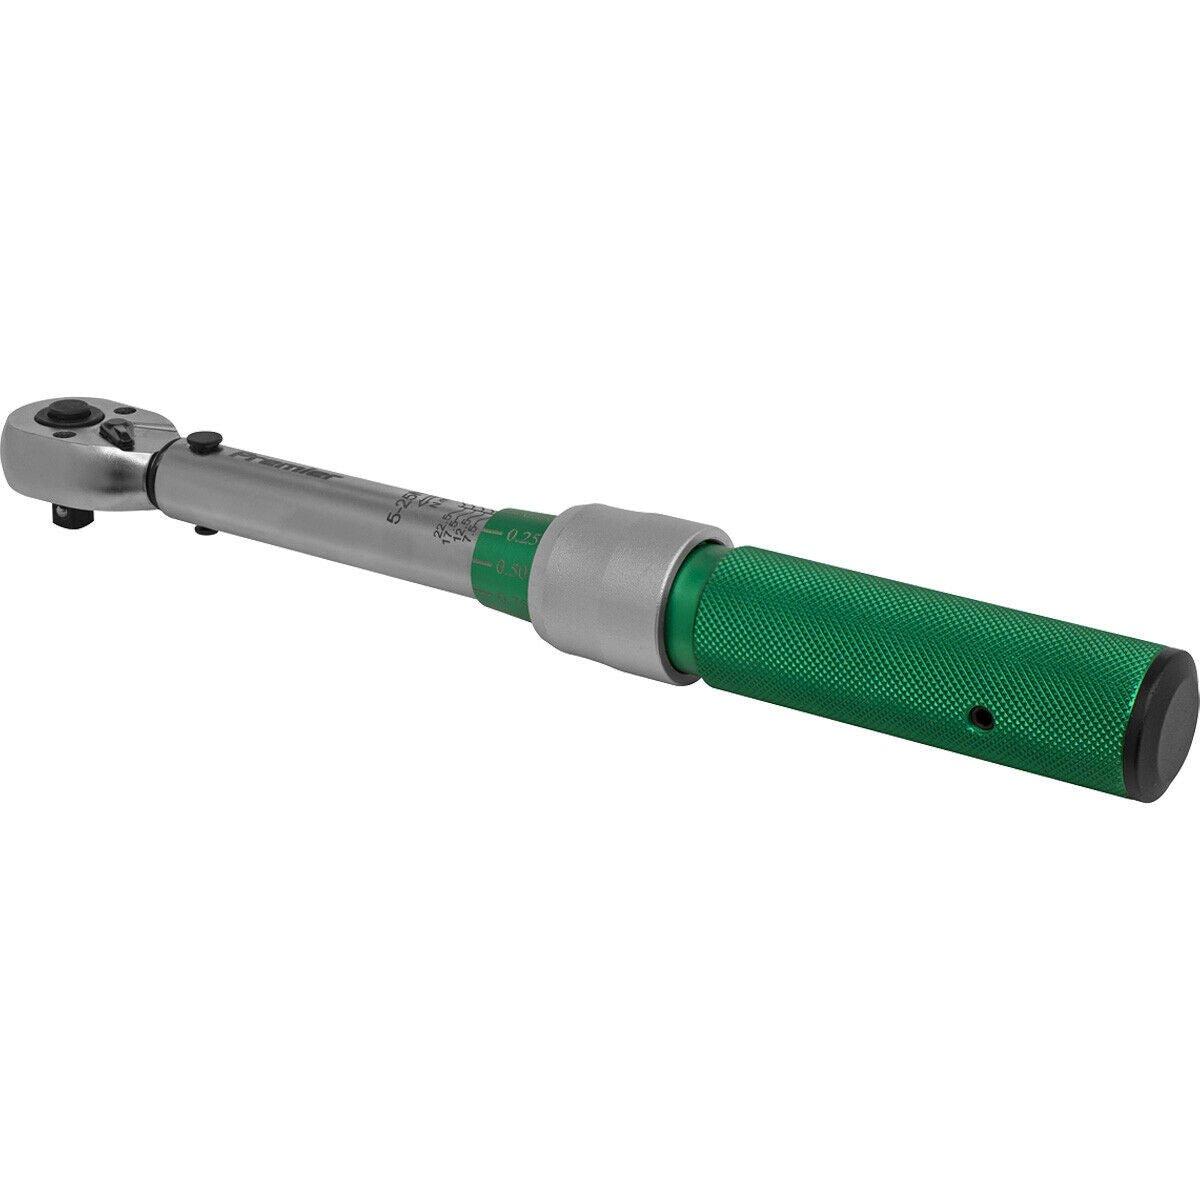 Micrometer Style Torque Wrench - 1/4